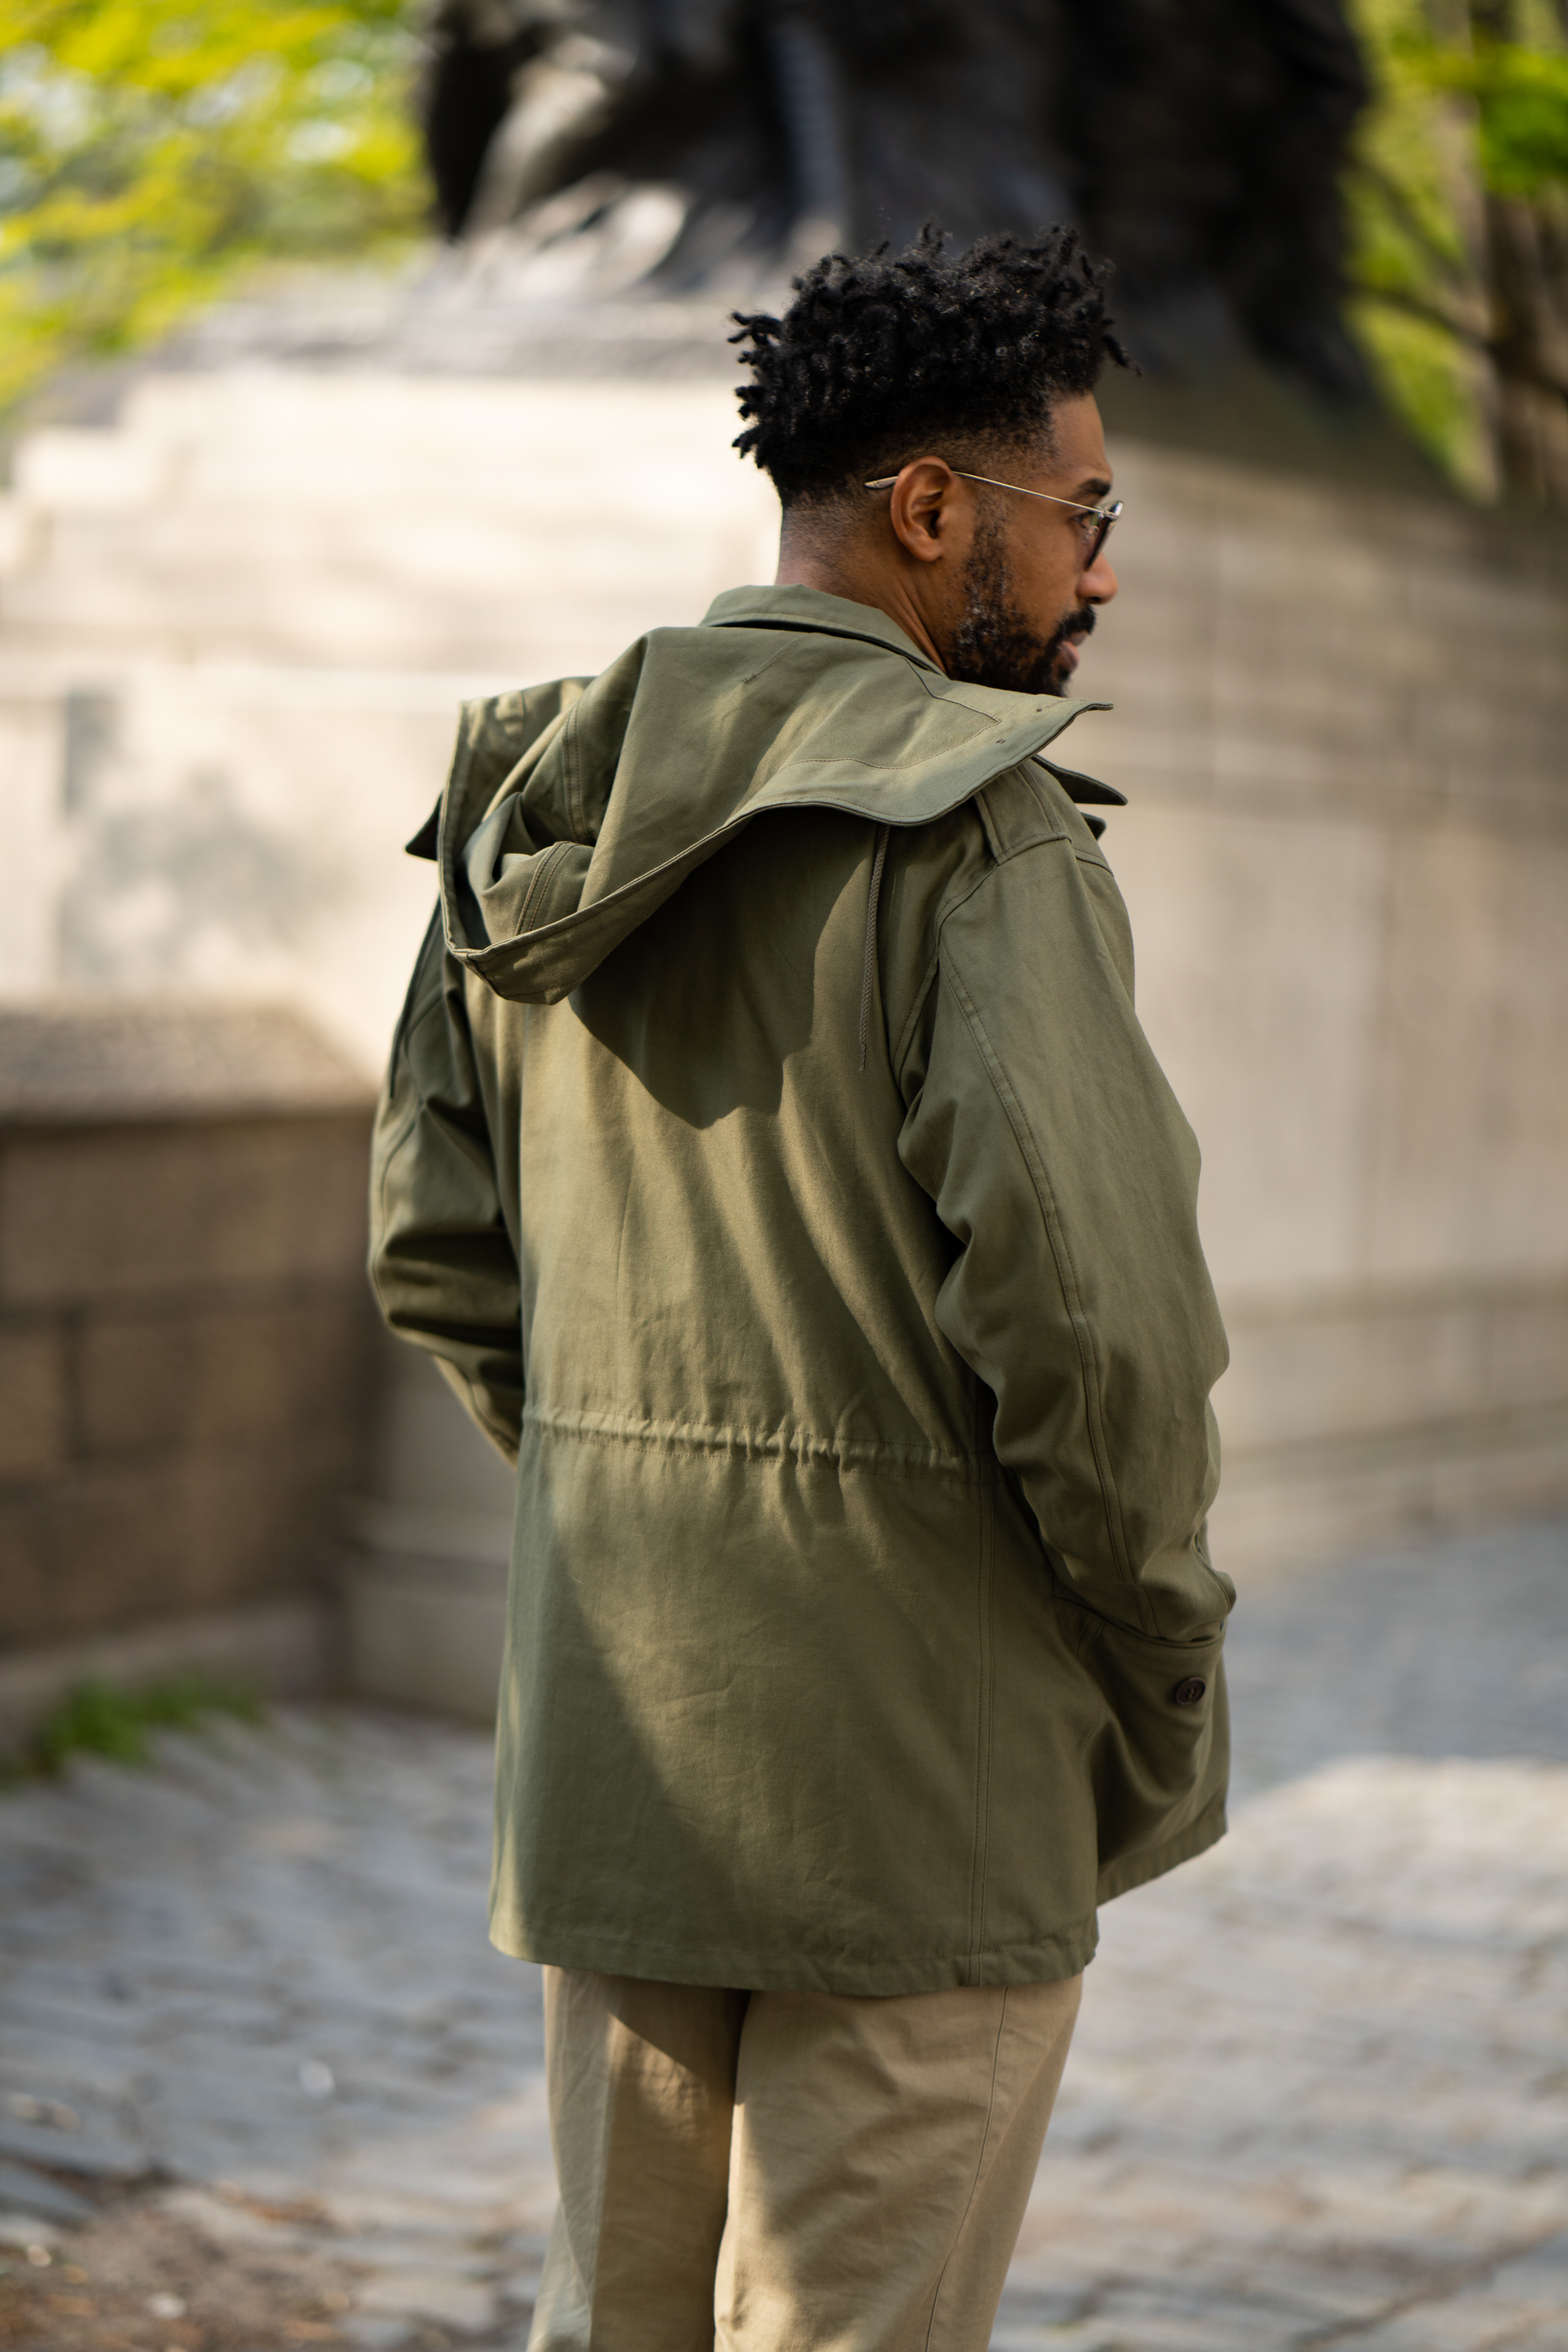 How the Army Jacket Became a Staple of Civilian Garb - The New York Times